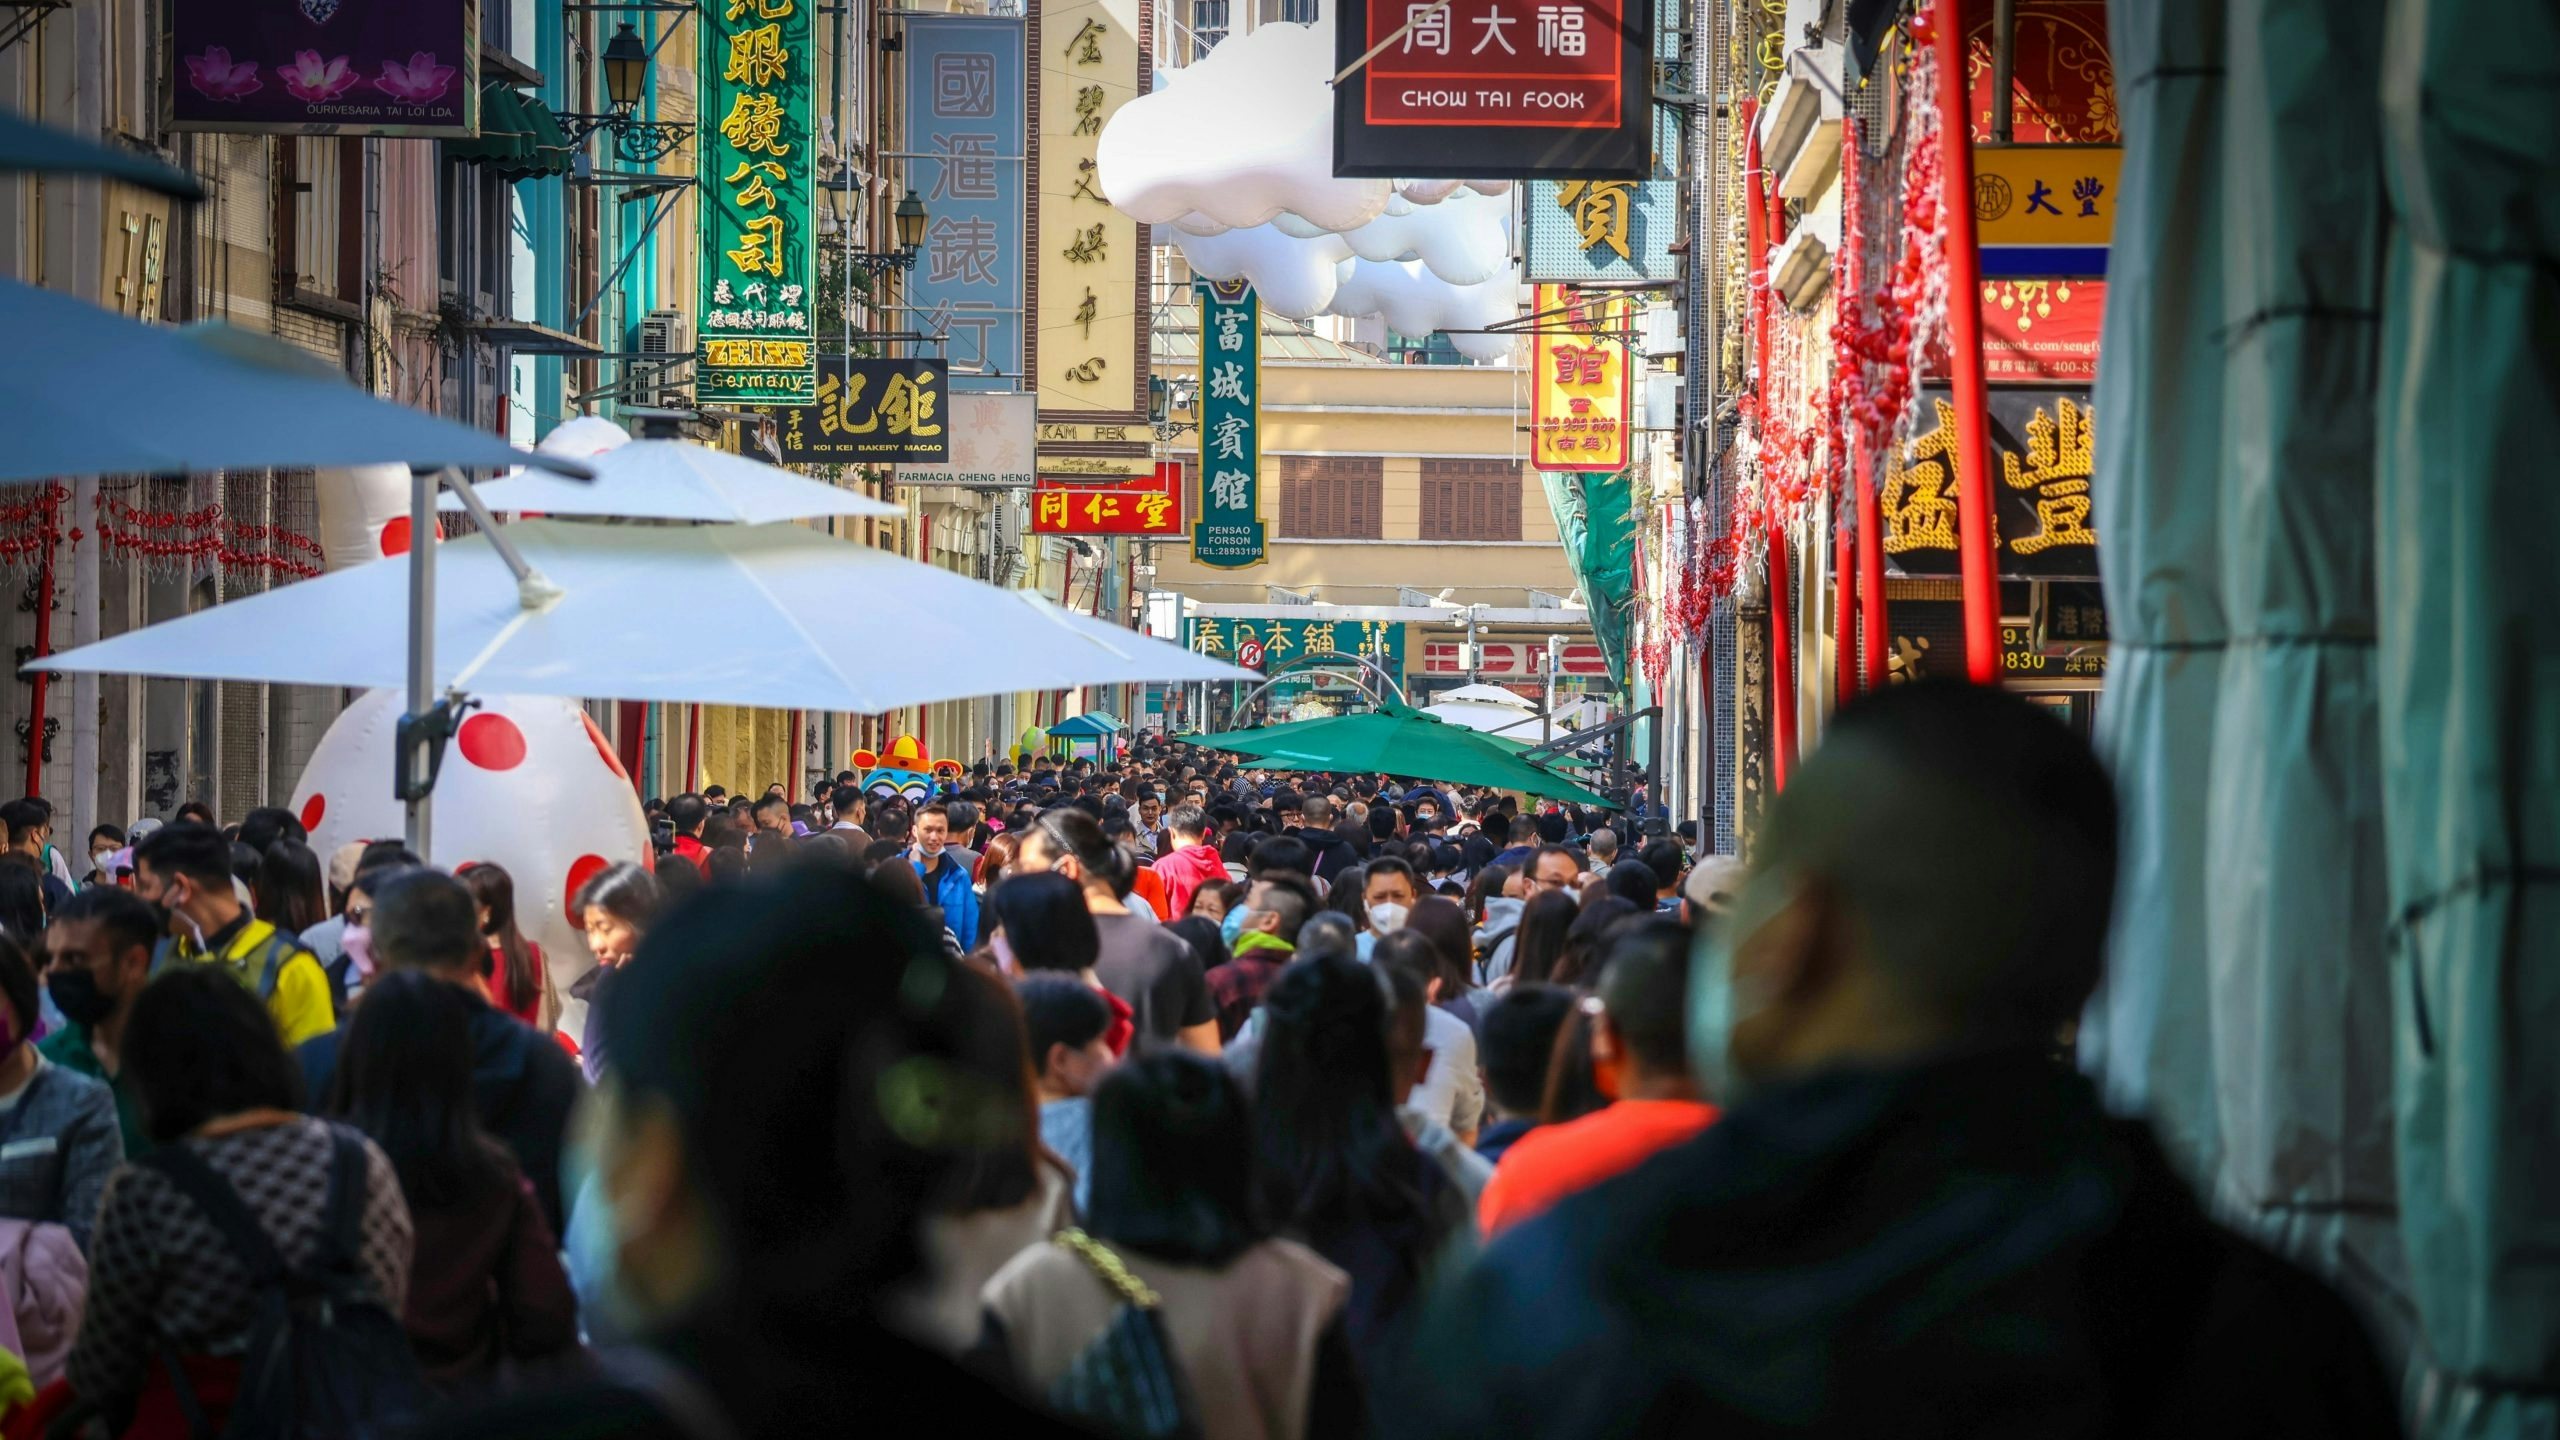 Travel bookings for China’s May Day holiday have surpassed pre-pandemic levels, a boon for both traditional tourist hubs and off-the-beaten-path destinations. Photo: Shutterstock